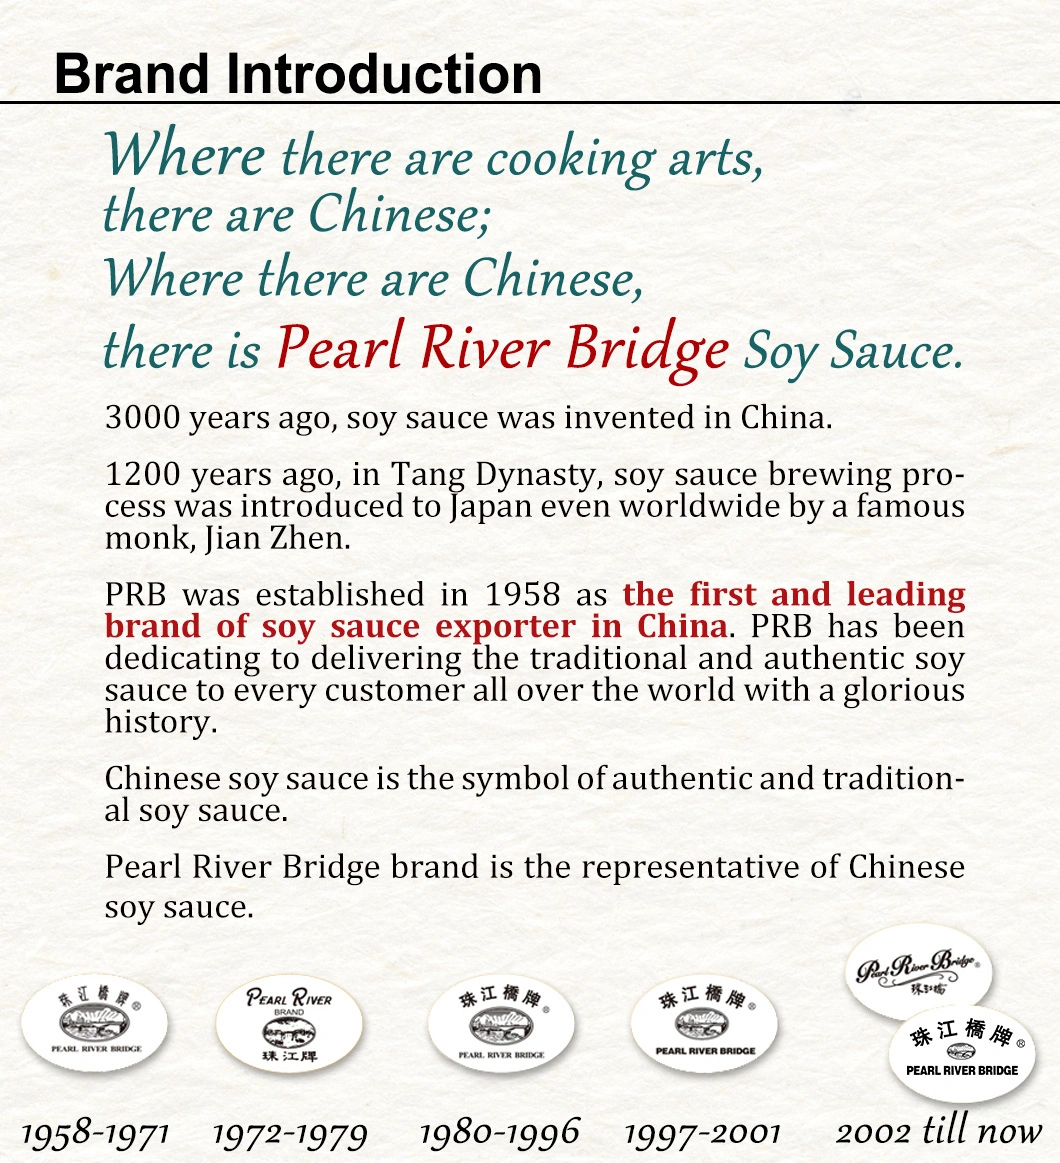 Pearl River Bridge (the Leading Soy Sauce Brand) Premium Delicious Soy Sauce 750ml for Cooking Food